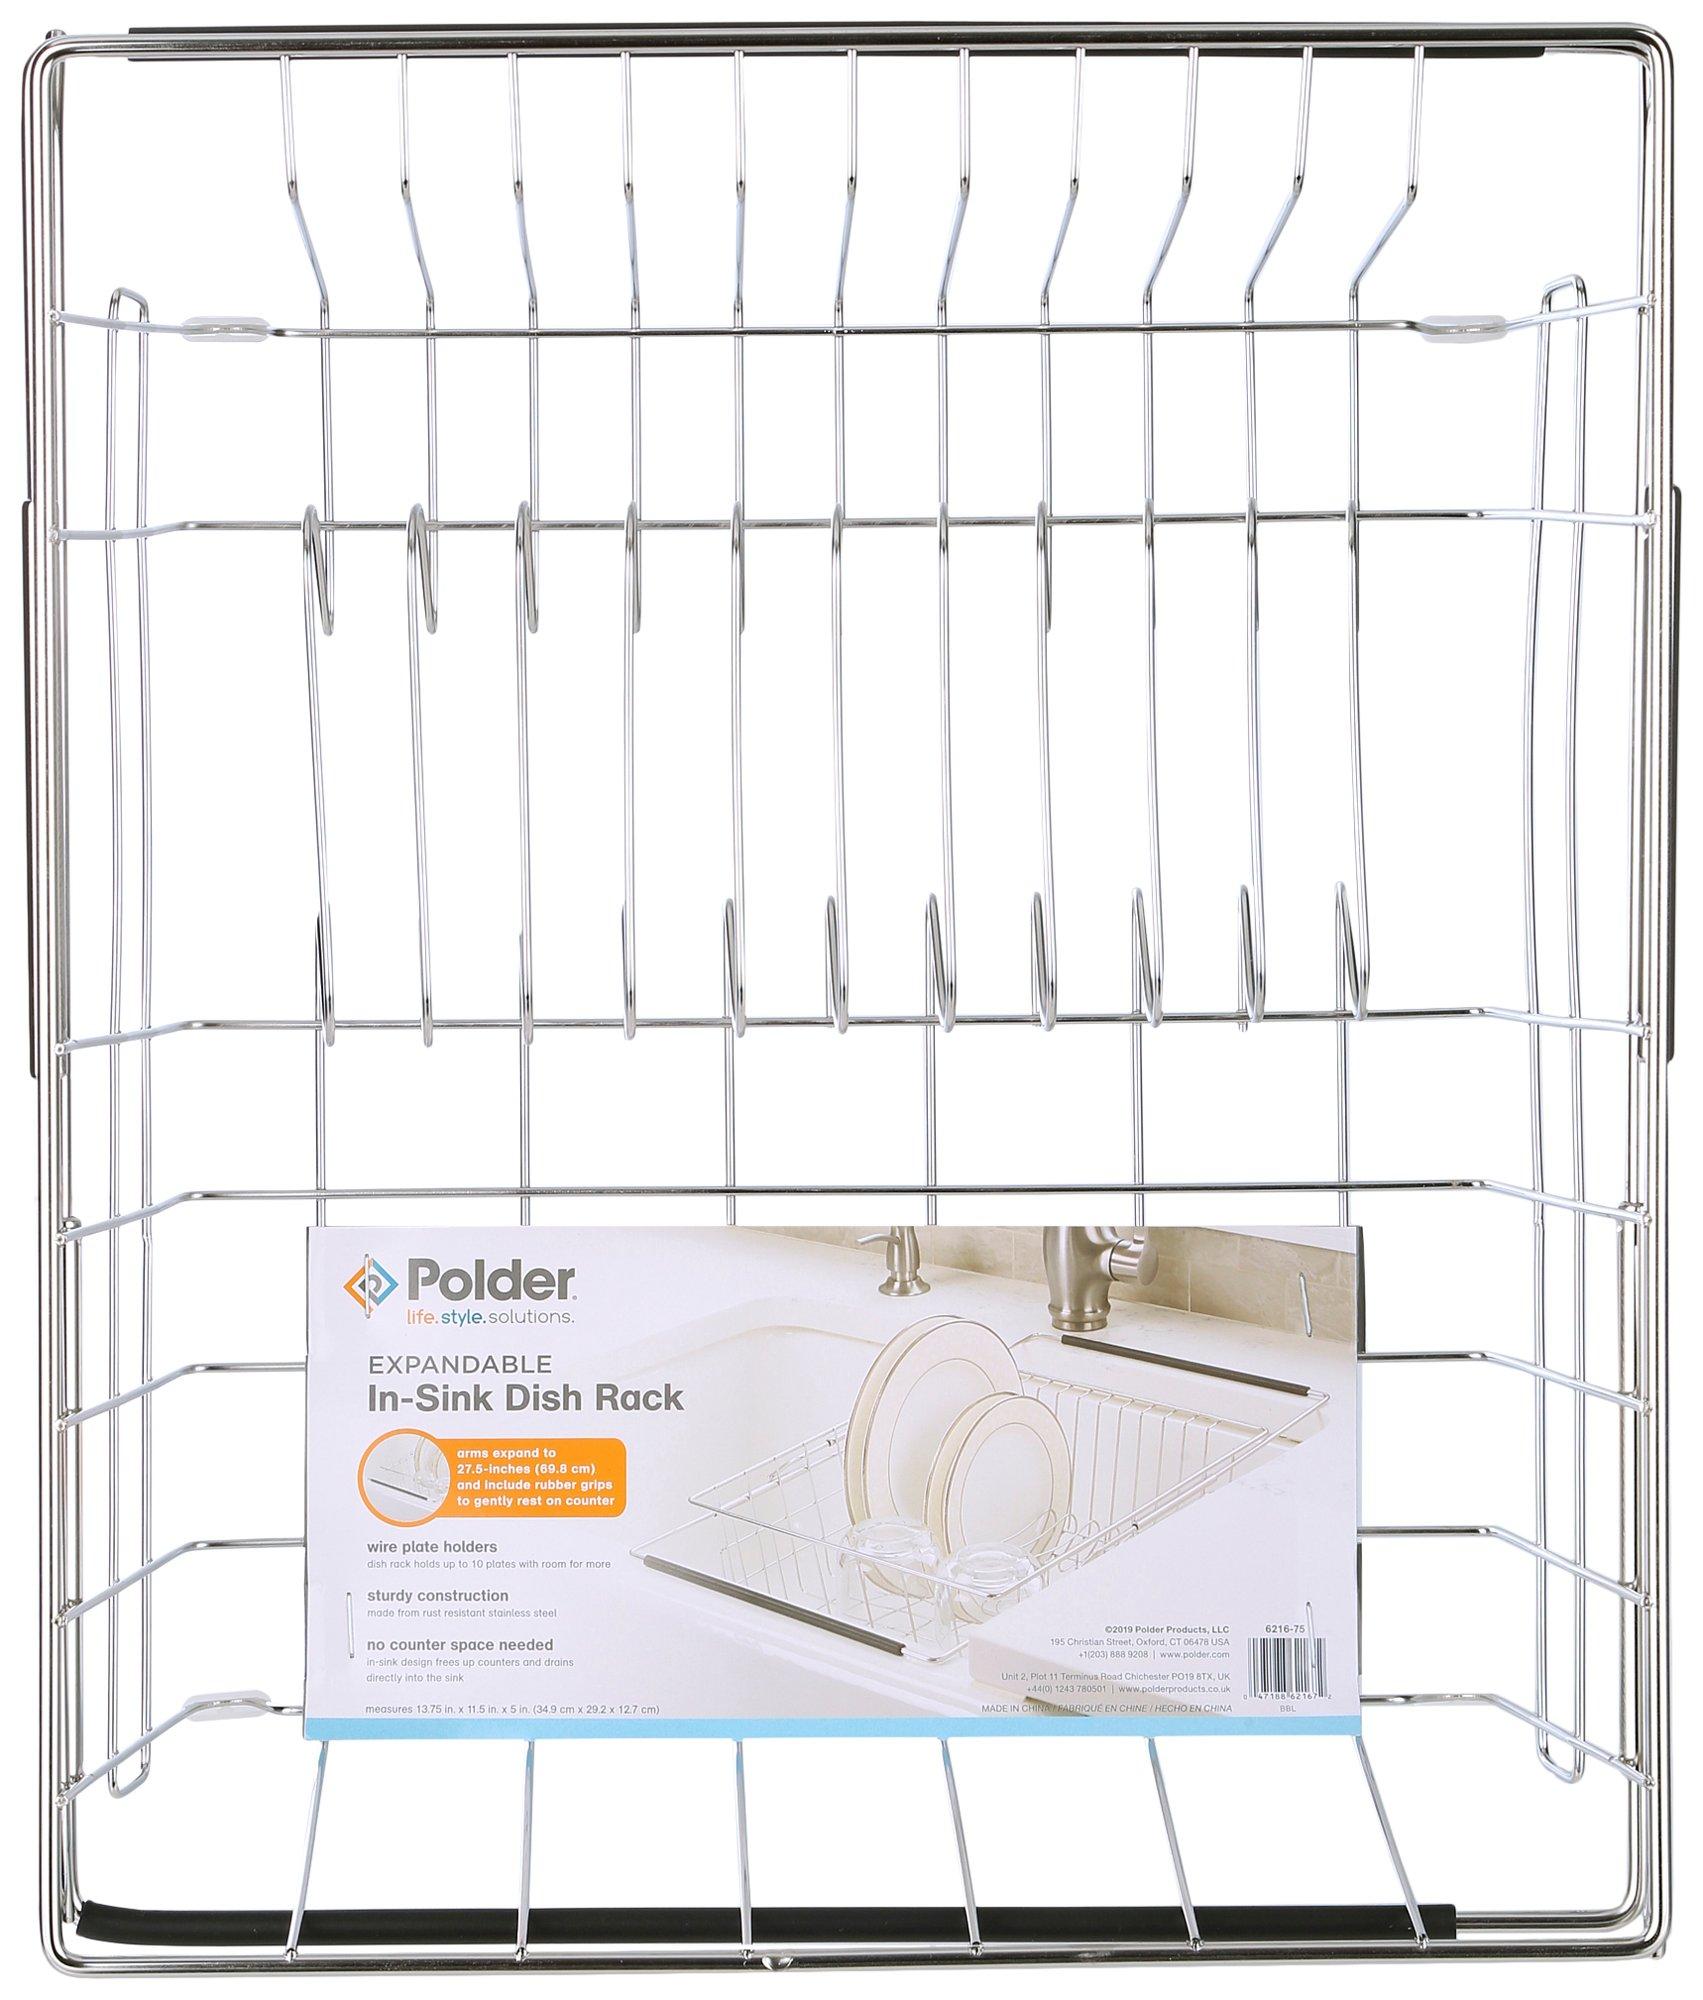 Polder Expandable In-Sink Dish Rack